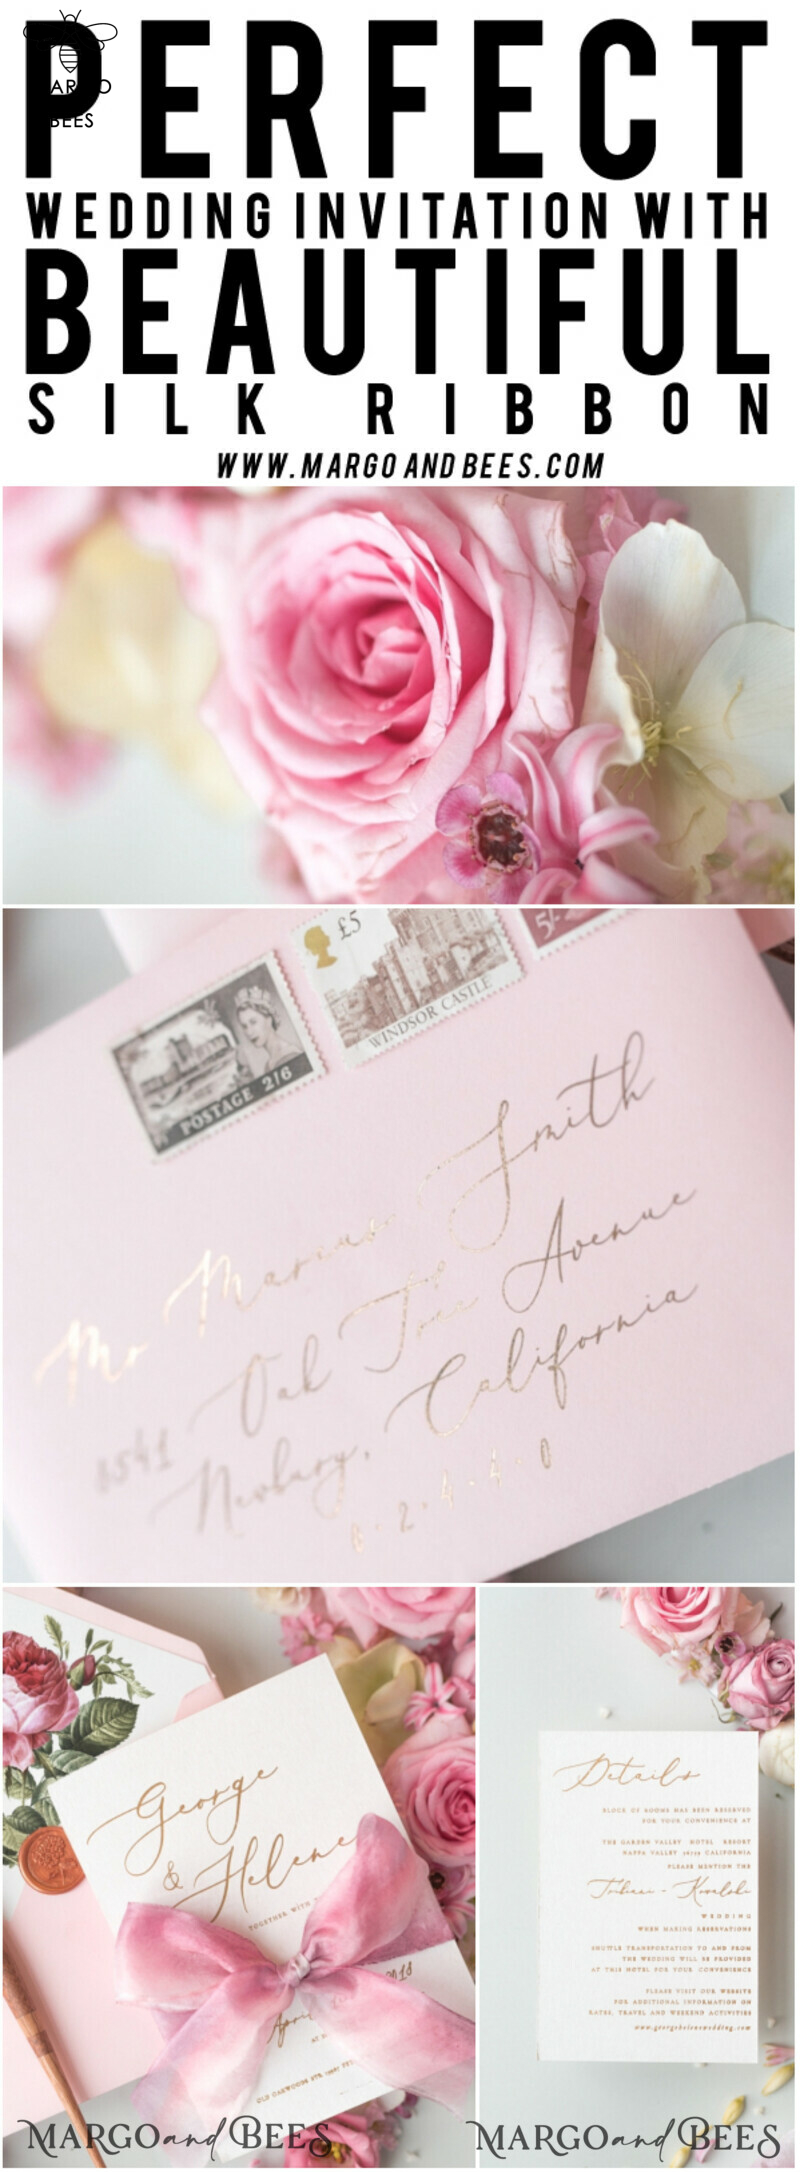 Romantic Blush Pink Wedding Invitations: Vintage Floral Wedding Invitation Suite with Elegant Wedding Cards and Hand Dyed Bow - Glamour Peony Wedding Stationery-46